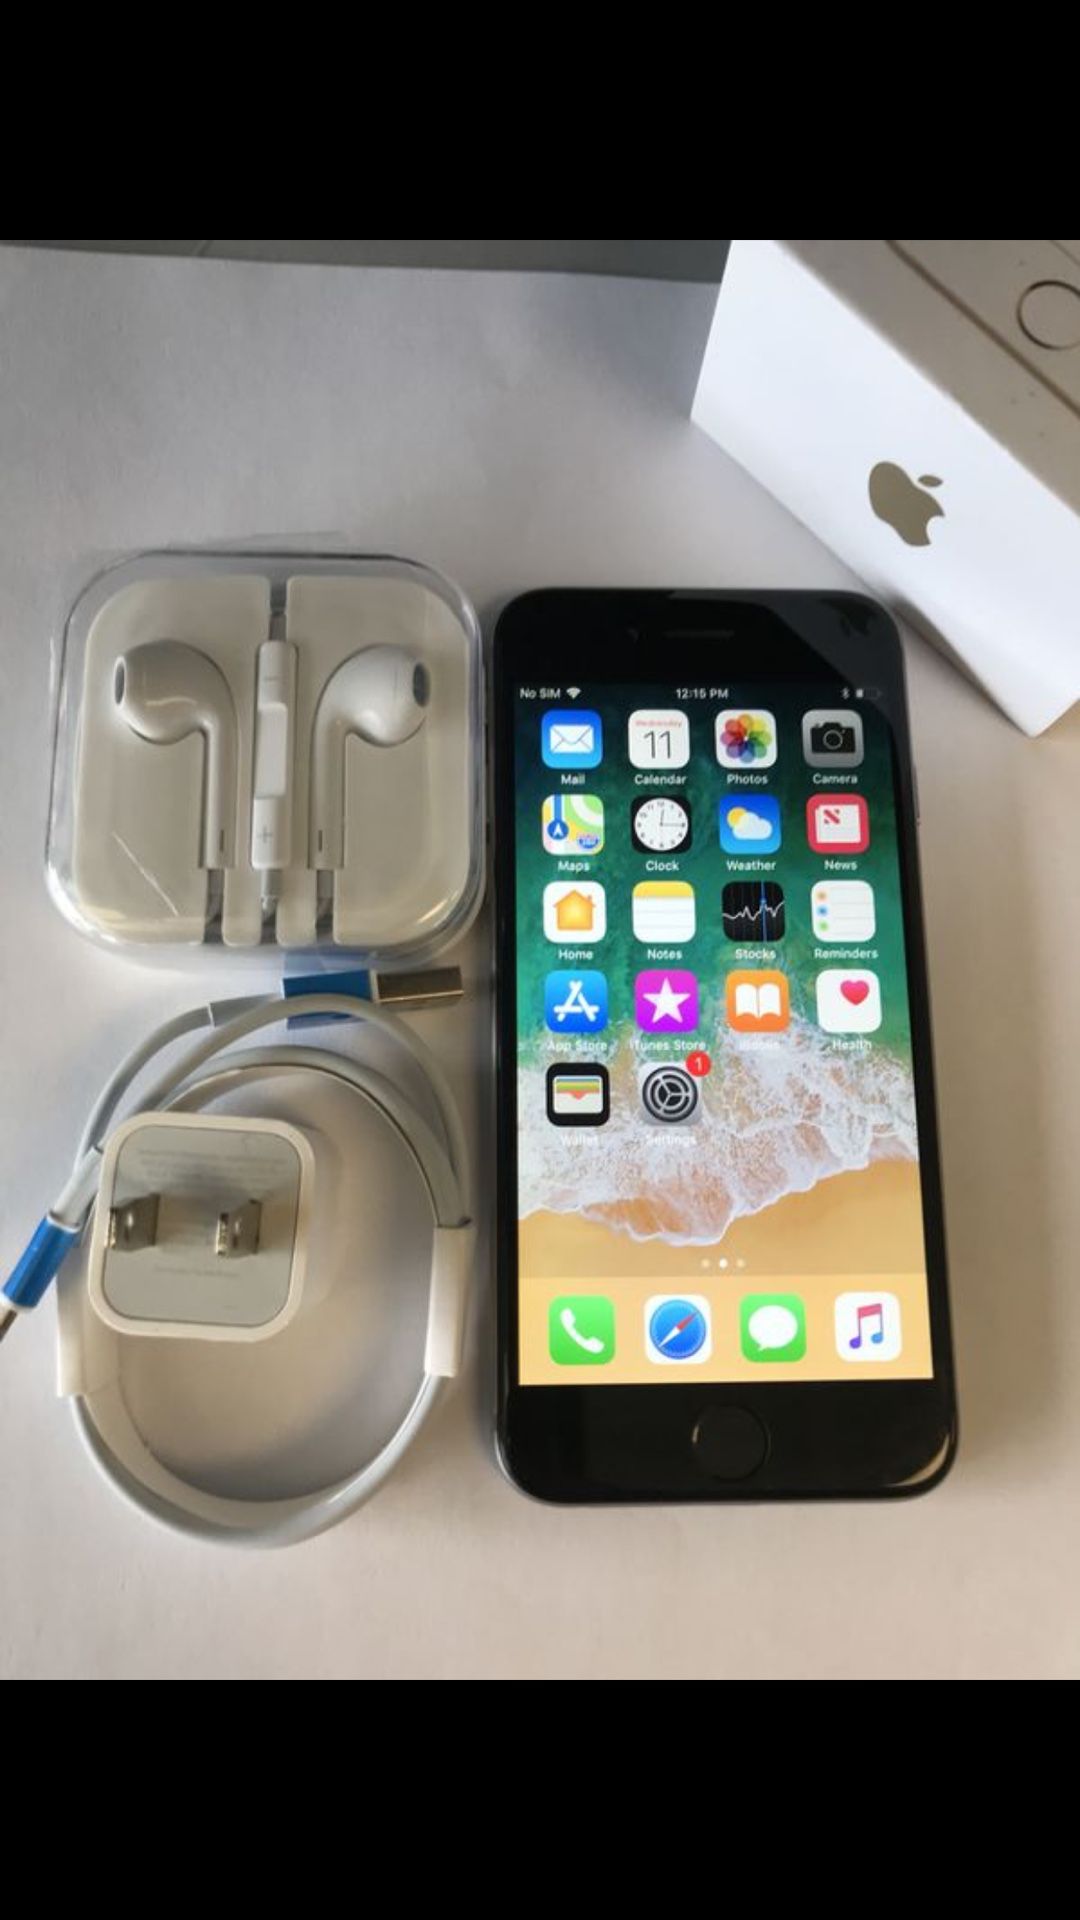 iPhone 6 16GB excellent condition factory Unlocked